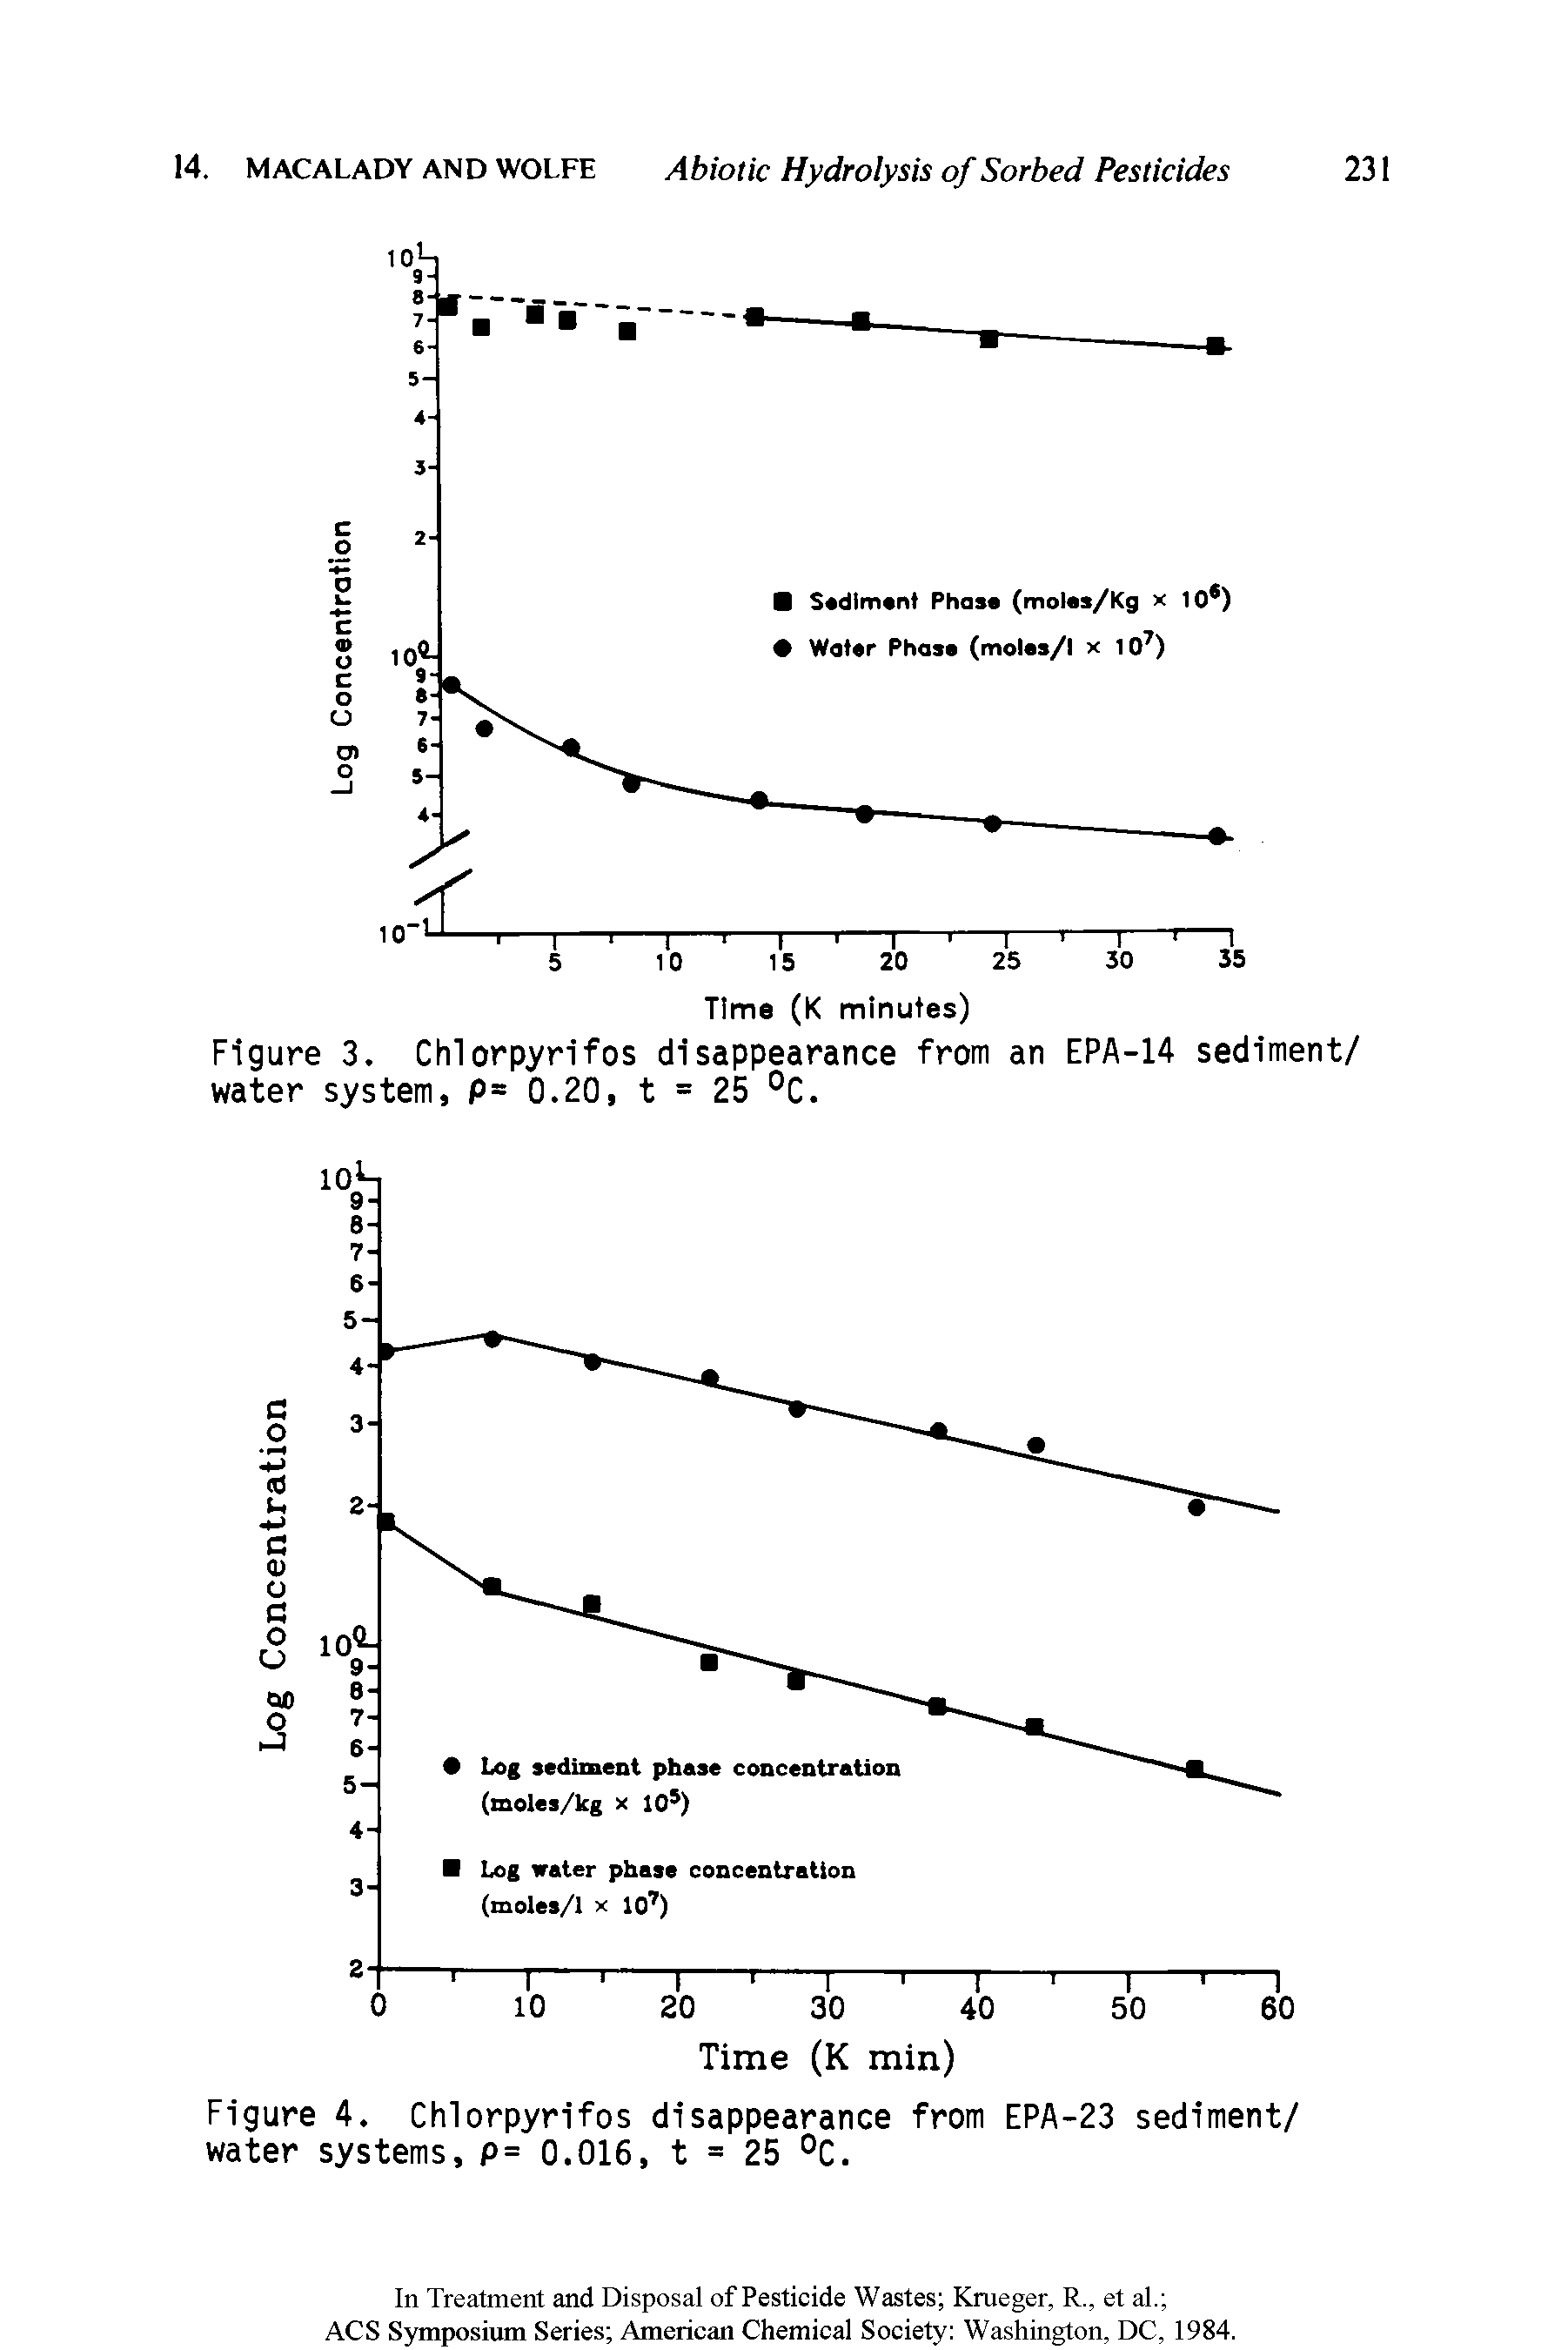 Figure 3. Chlorpyrifos disappearance from an EPA-14 sediment/ water system, P= 0.20, t = 25 °C.